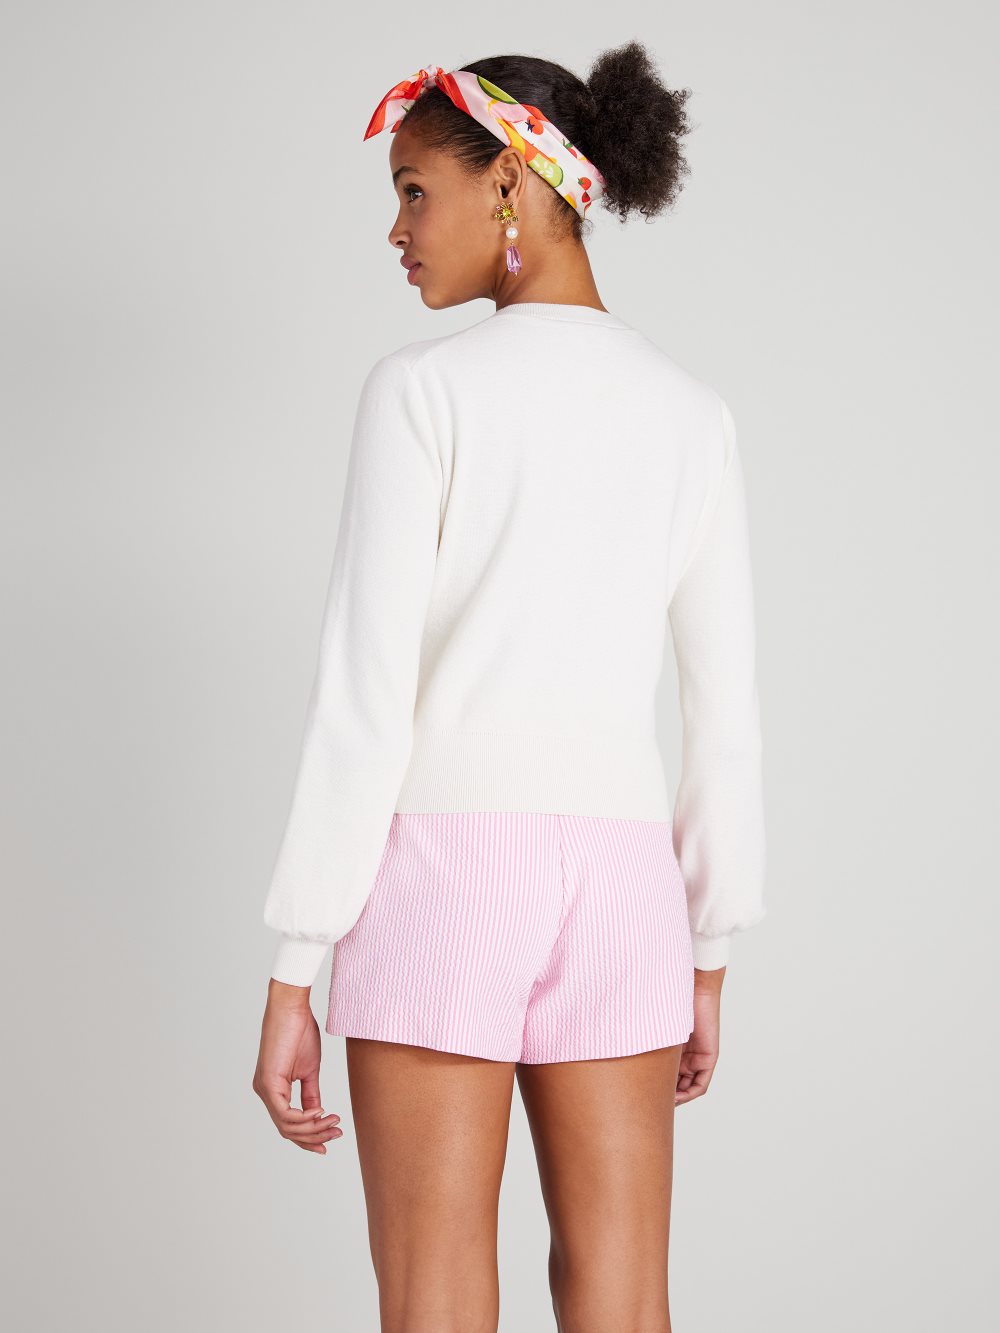 Women's cream. floral embroidered cardigan | Kate Spade